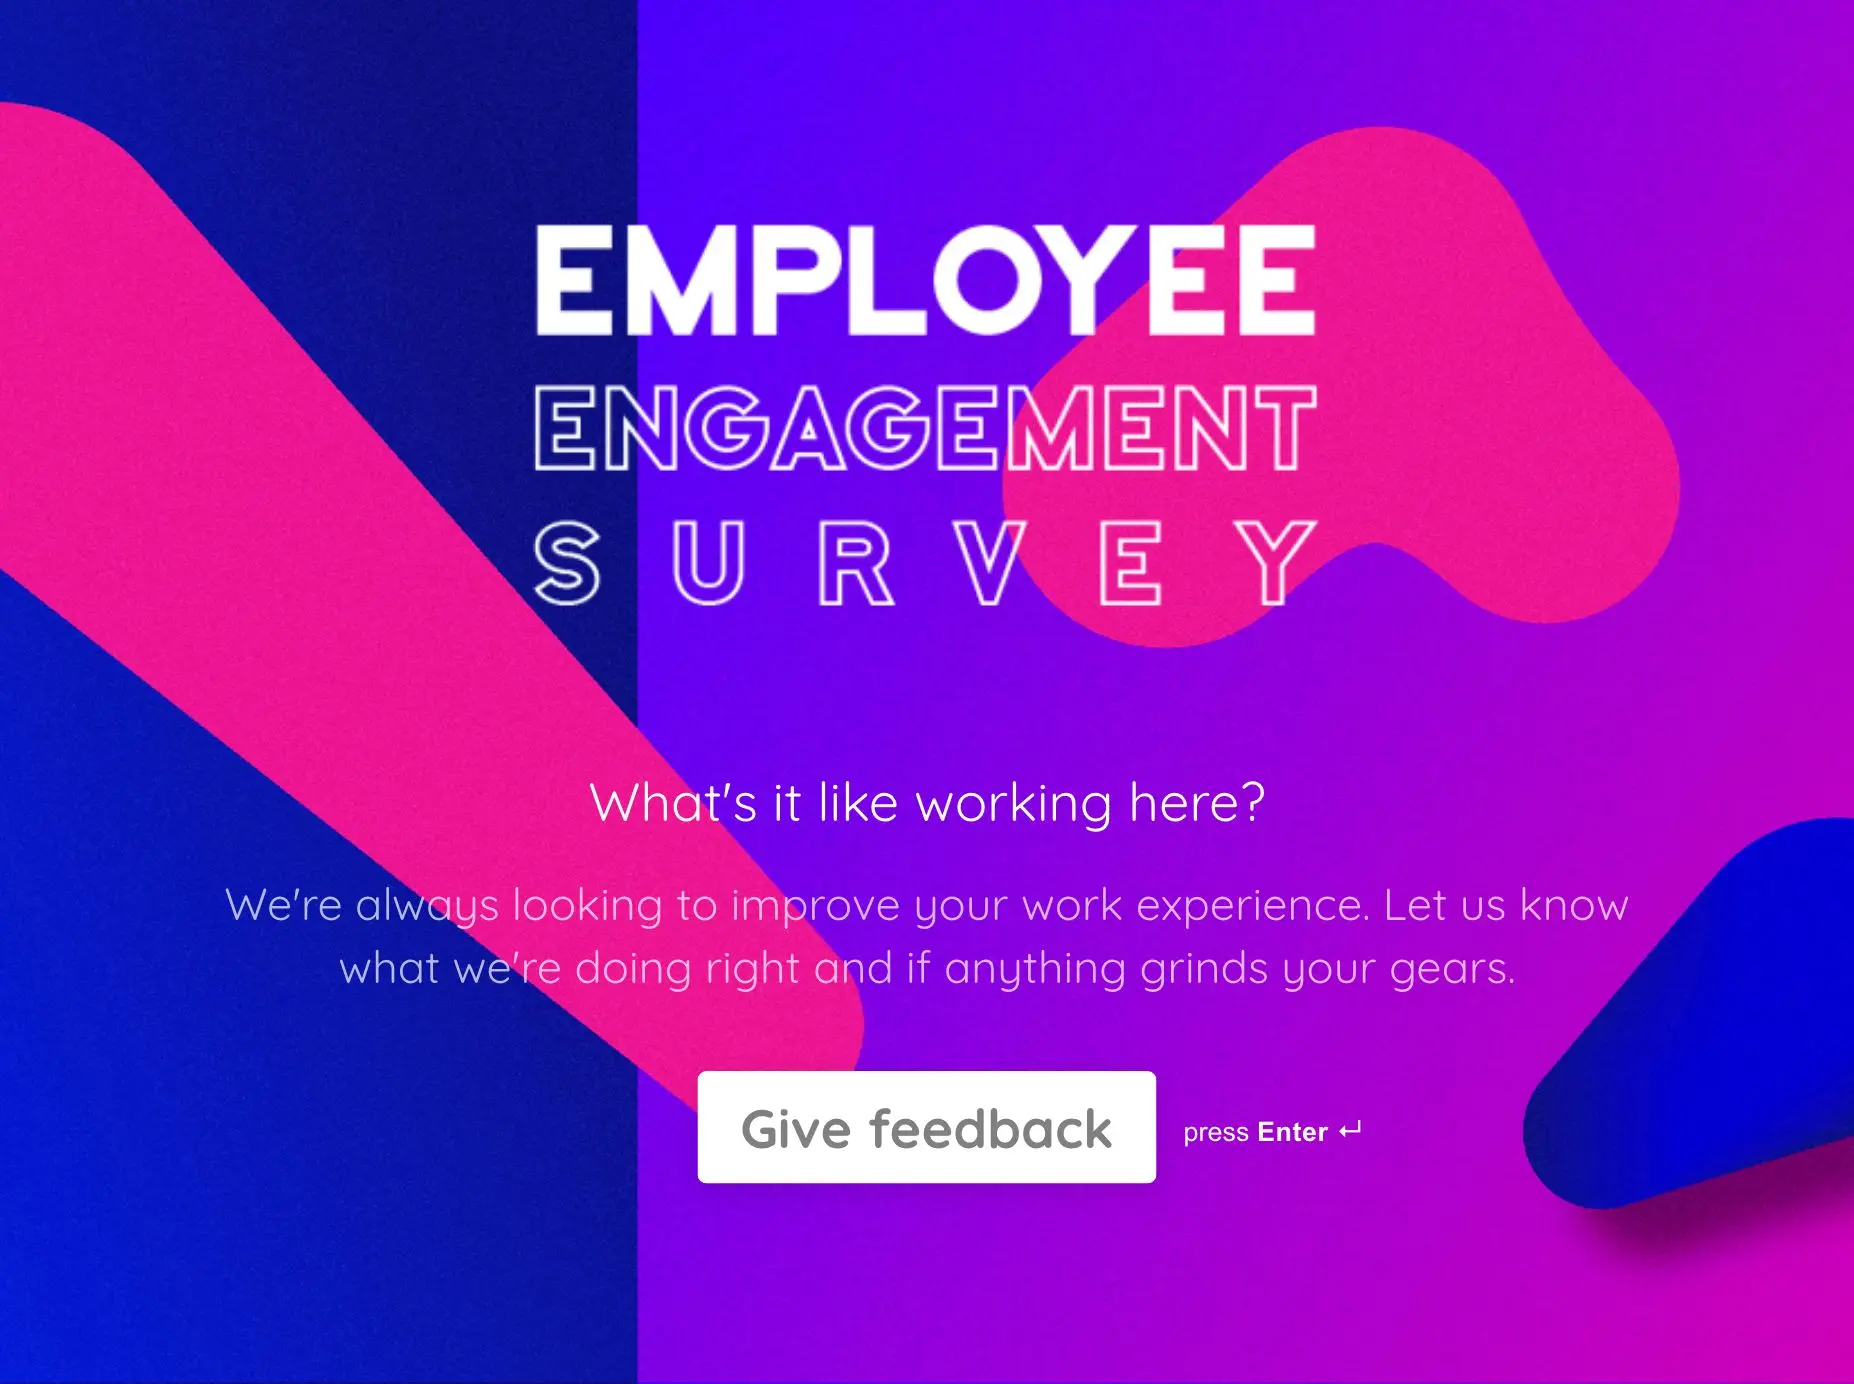 Typeform Beautifies the Boring Survey for Employees or Clients —  OfficeNinjas